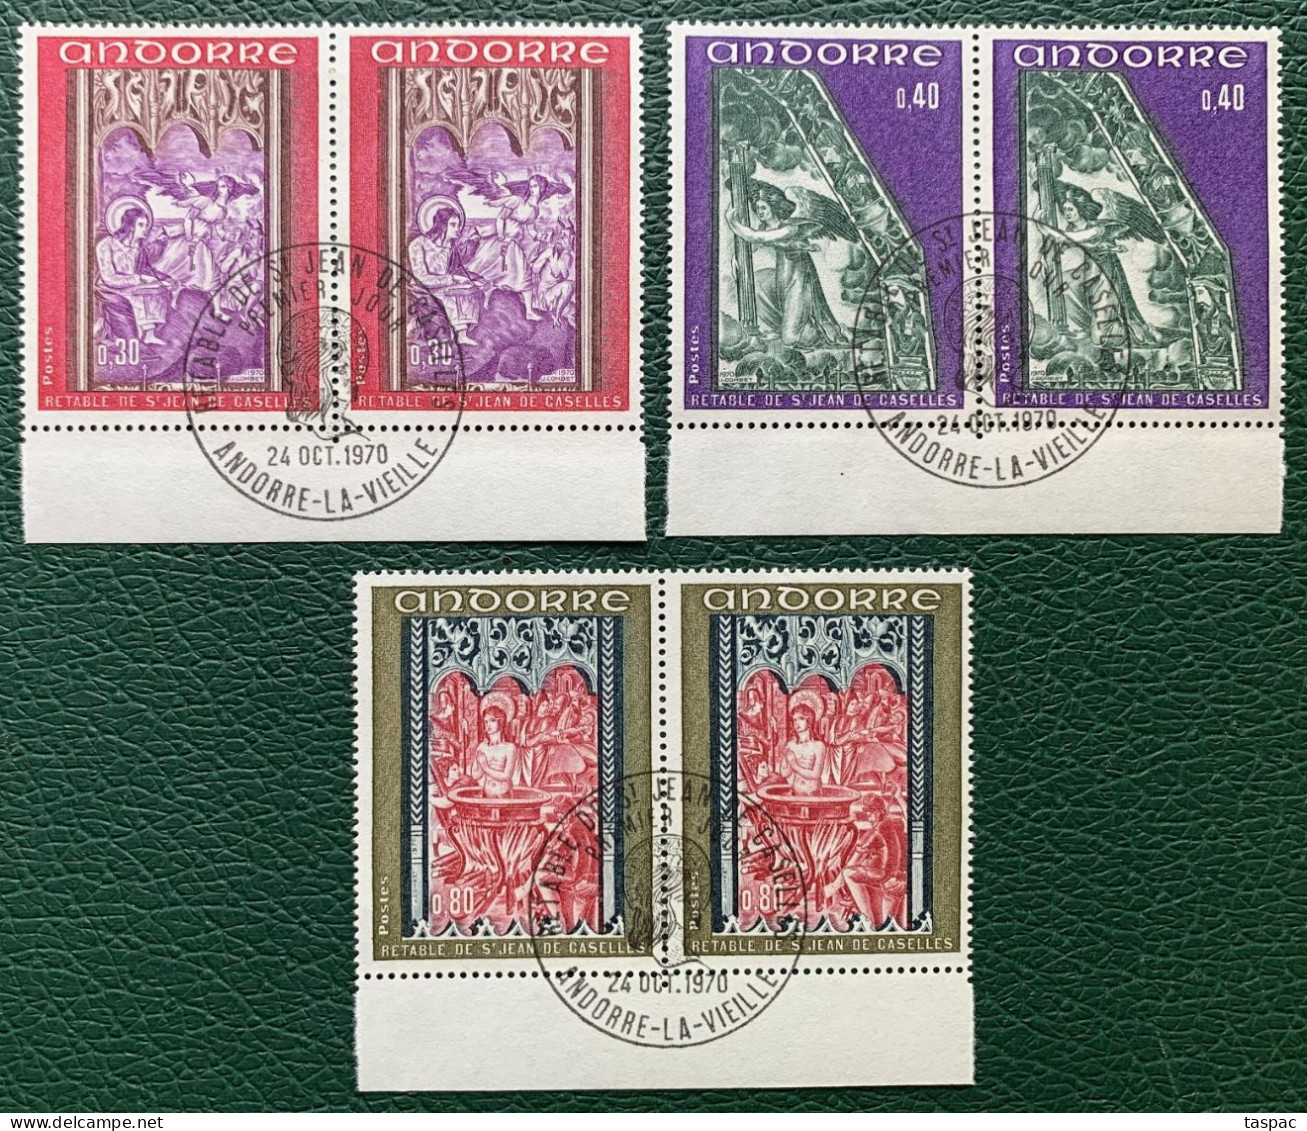 French Andorra 1970 Mi# 226-228 Used - Set In Pairs - The Revelation / Frescoes From The Altar Of St. John, Caselles - Gebruikt